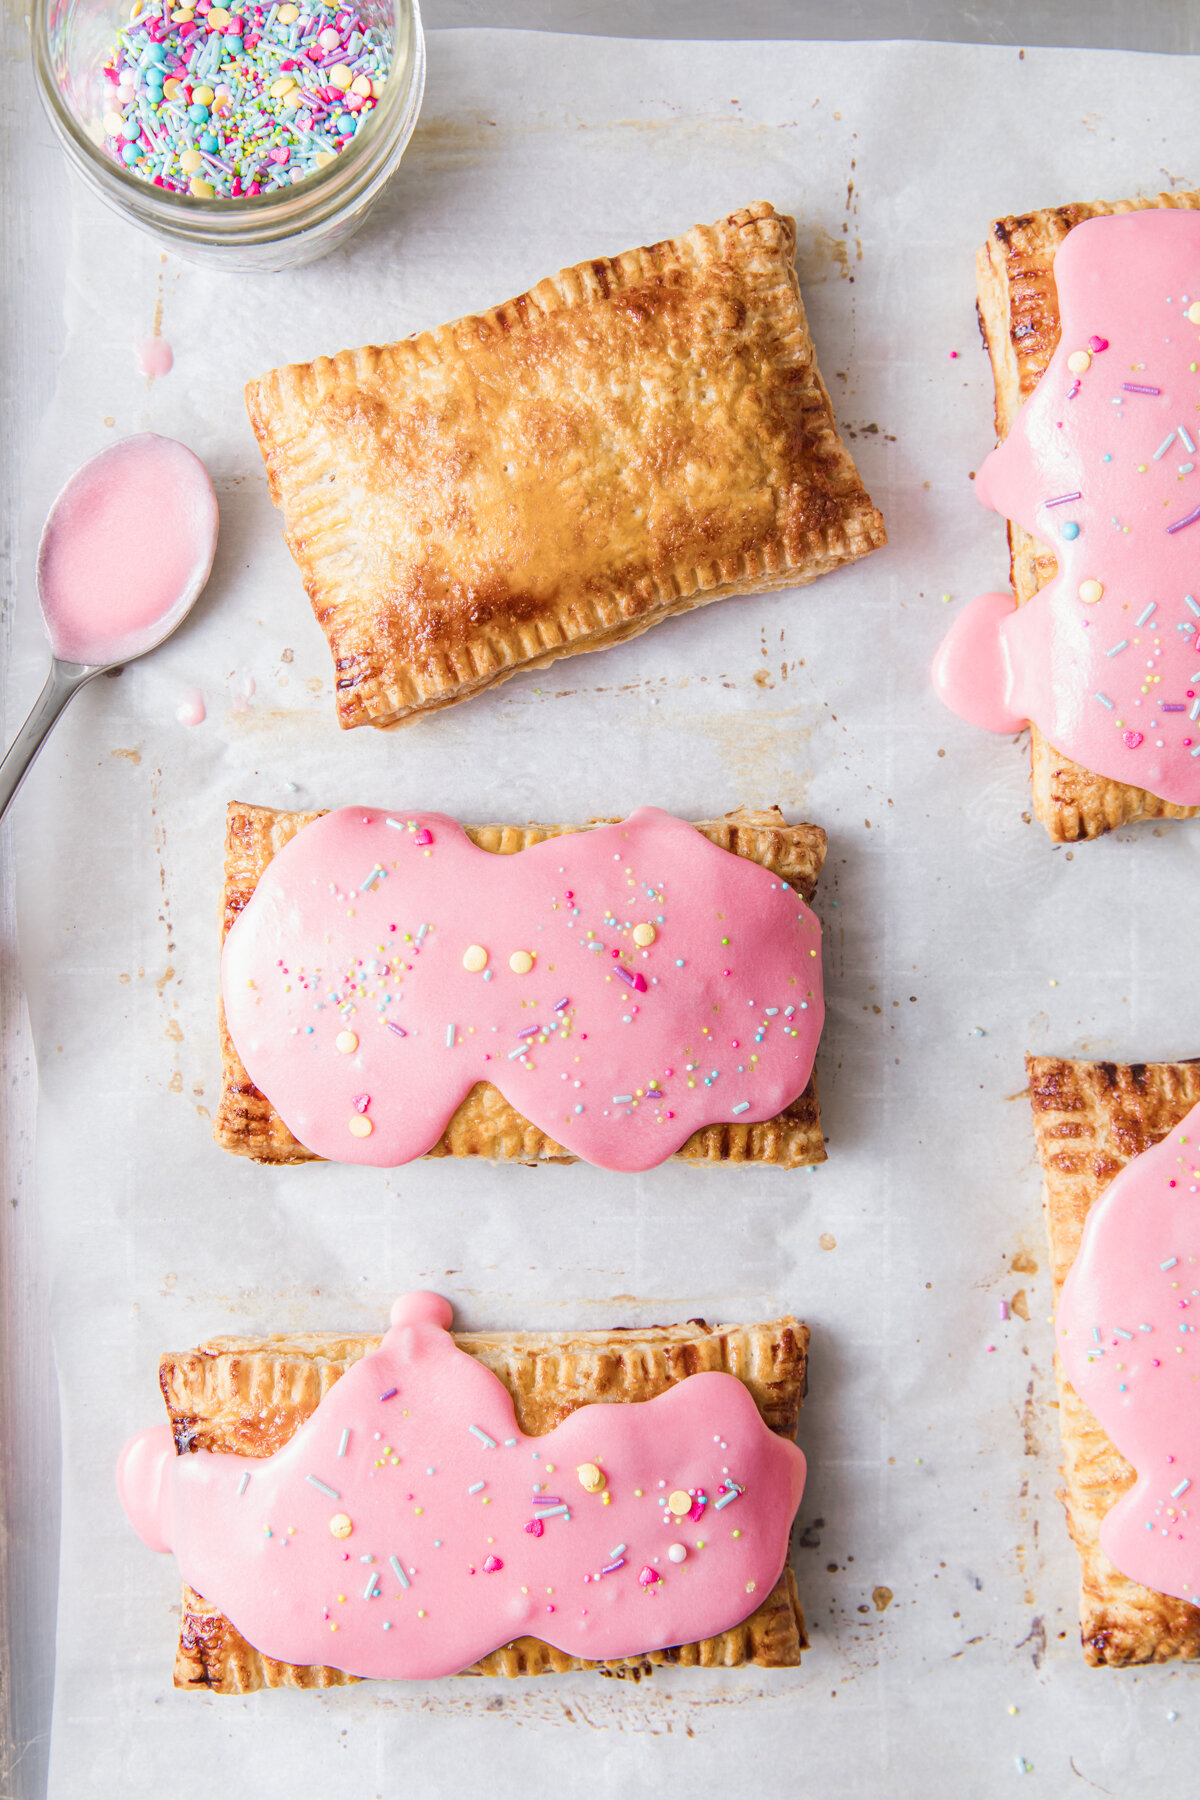 Homemade Strawberry Pop Tarts being glazed wtih pink frosting on a baking sheet.